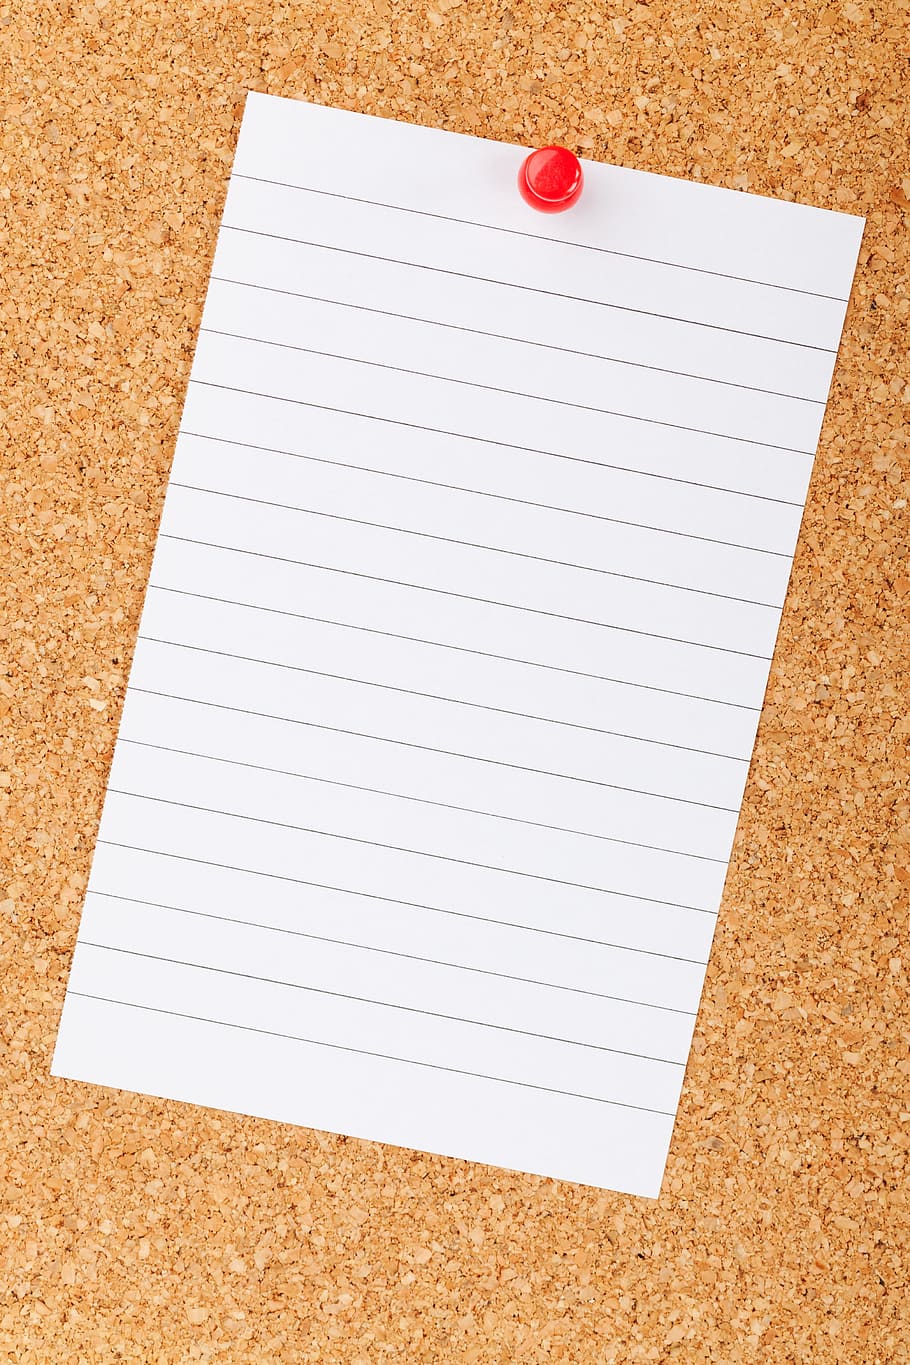 black, lined, paper, pinned, cork board, white, writing paper, blank, board, business